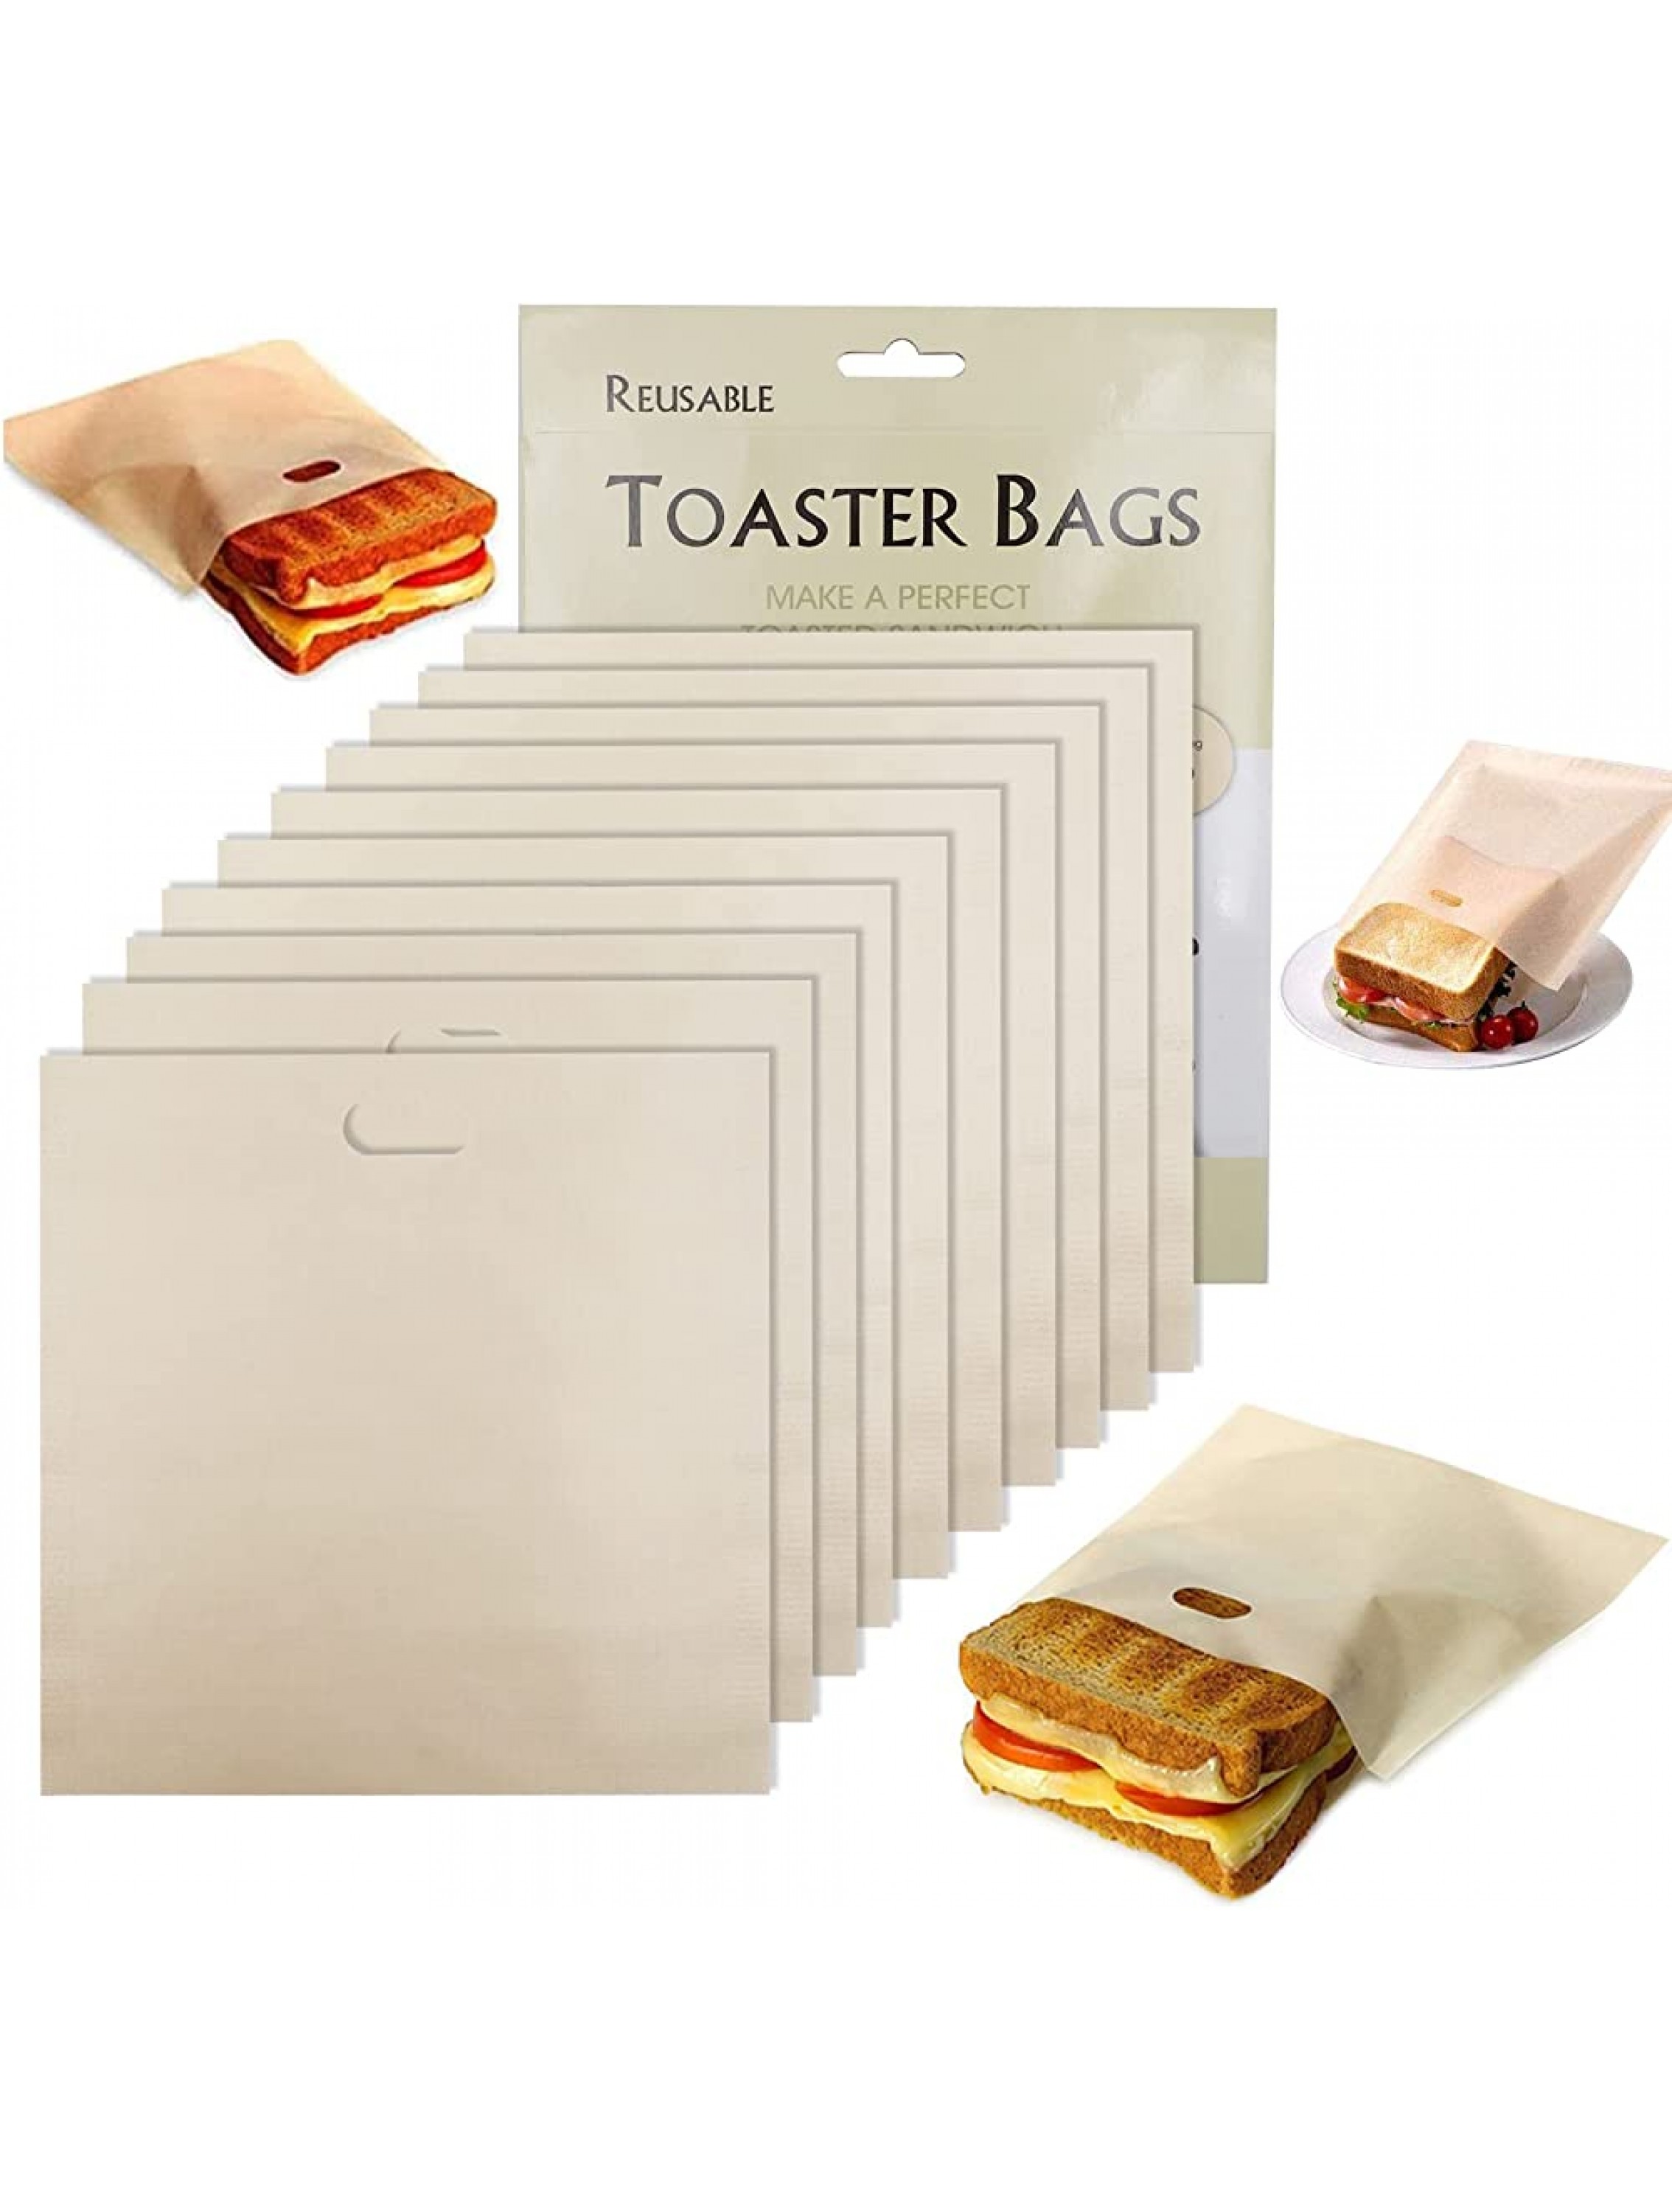 Tezam Toaster Bags Reusable for Grilled Cheese Sandwiches | Safest On The Market 100% BPA & Gluten Free | Non Stick Toast Bag 10PCS - BA65AHDLY